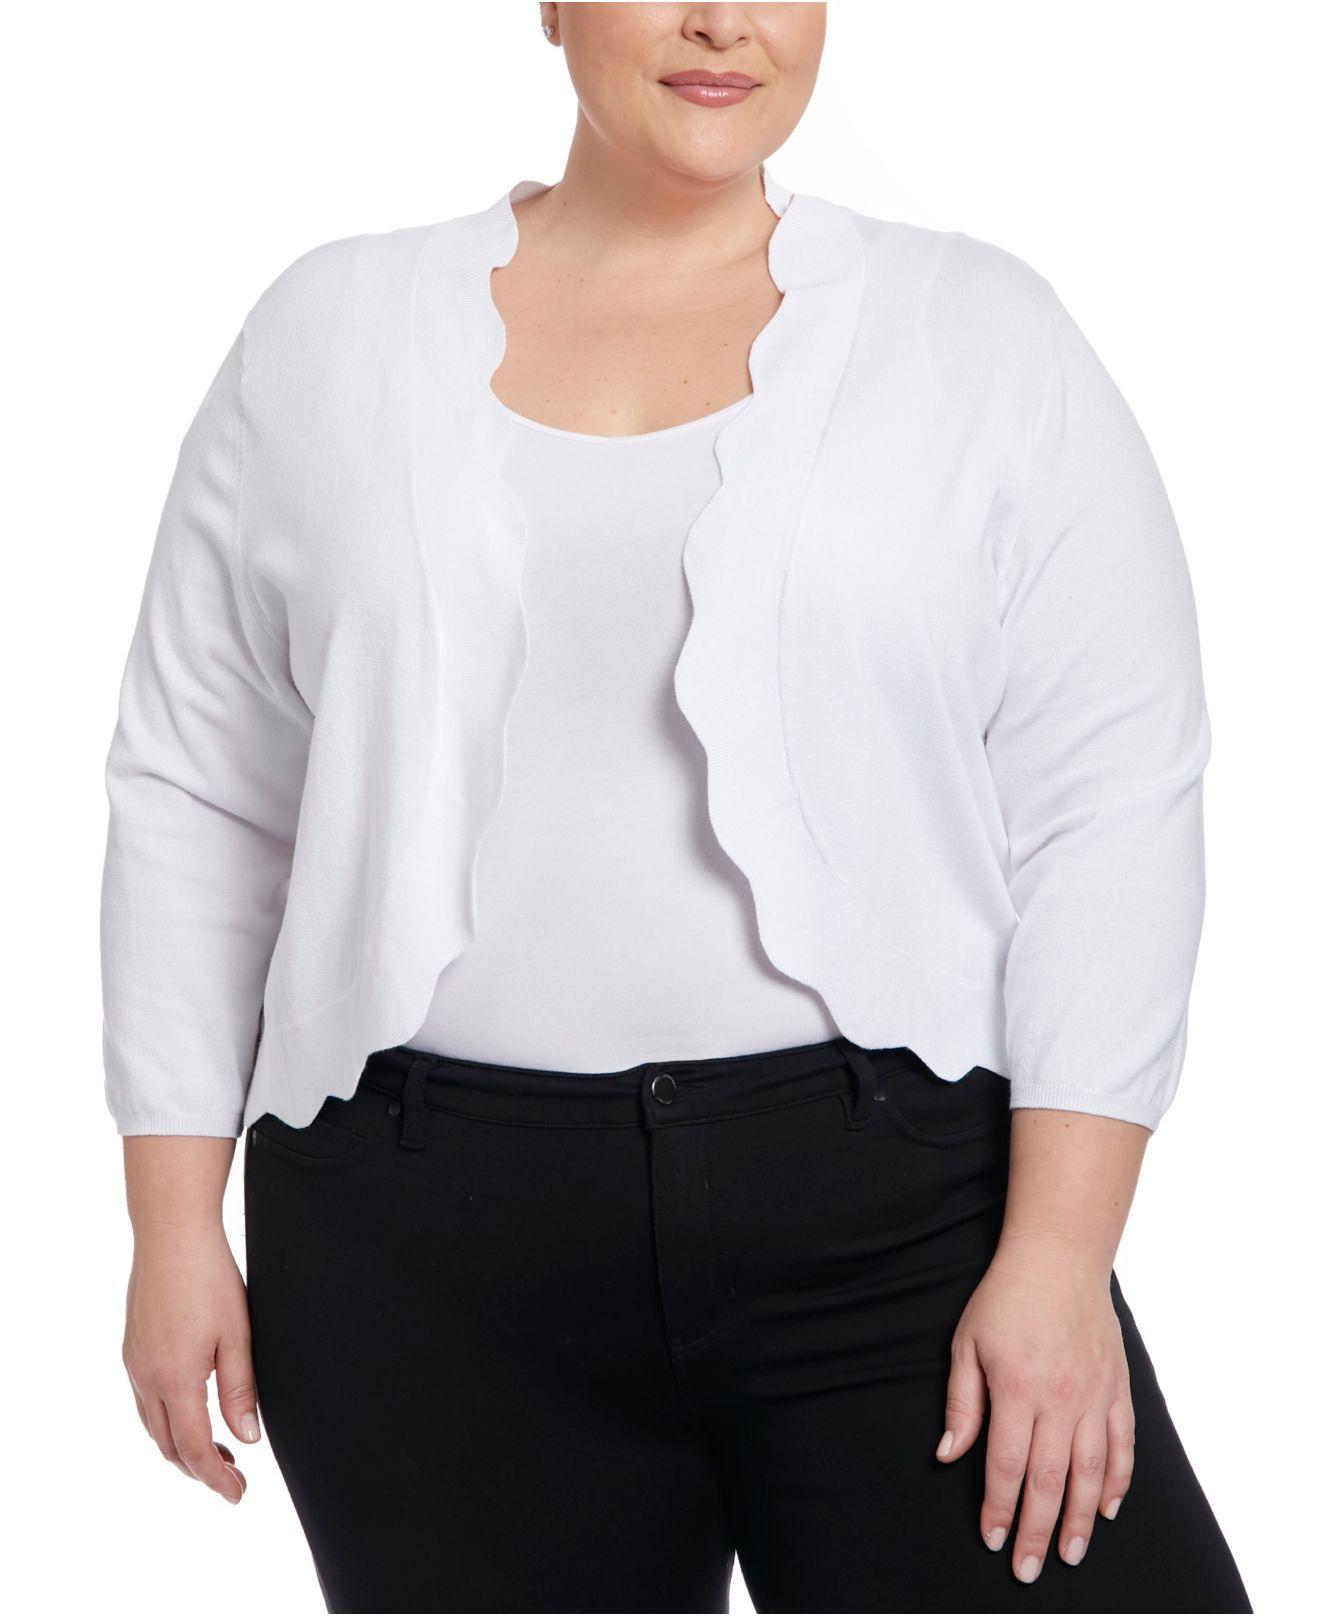 Joseph A Plus Size Scalloped Edge Open Front Cardigan Sweater in White |  Lyst